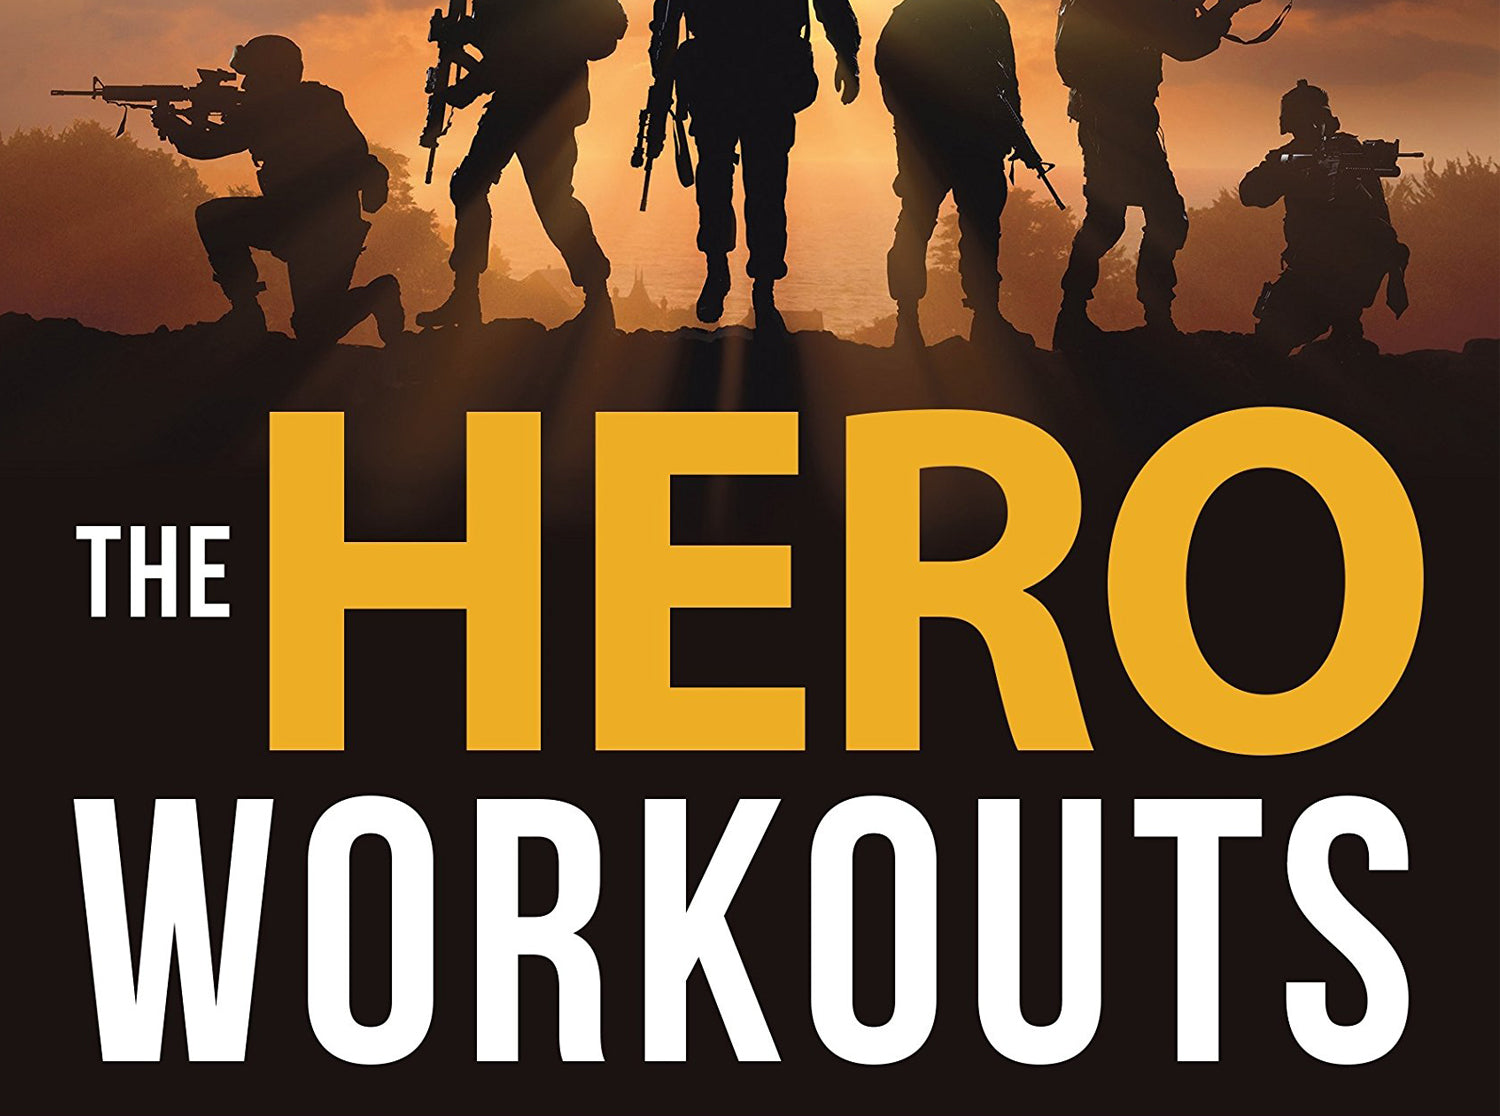 The Hero Workouts: 100 Workouts Dedicated to Fallen Soldiers & Warriors - Everyday Crosstrain